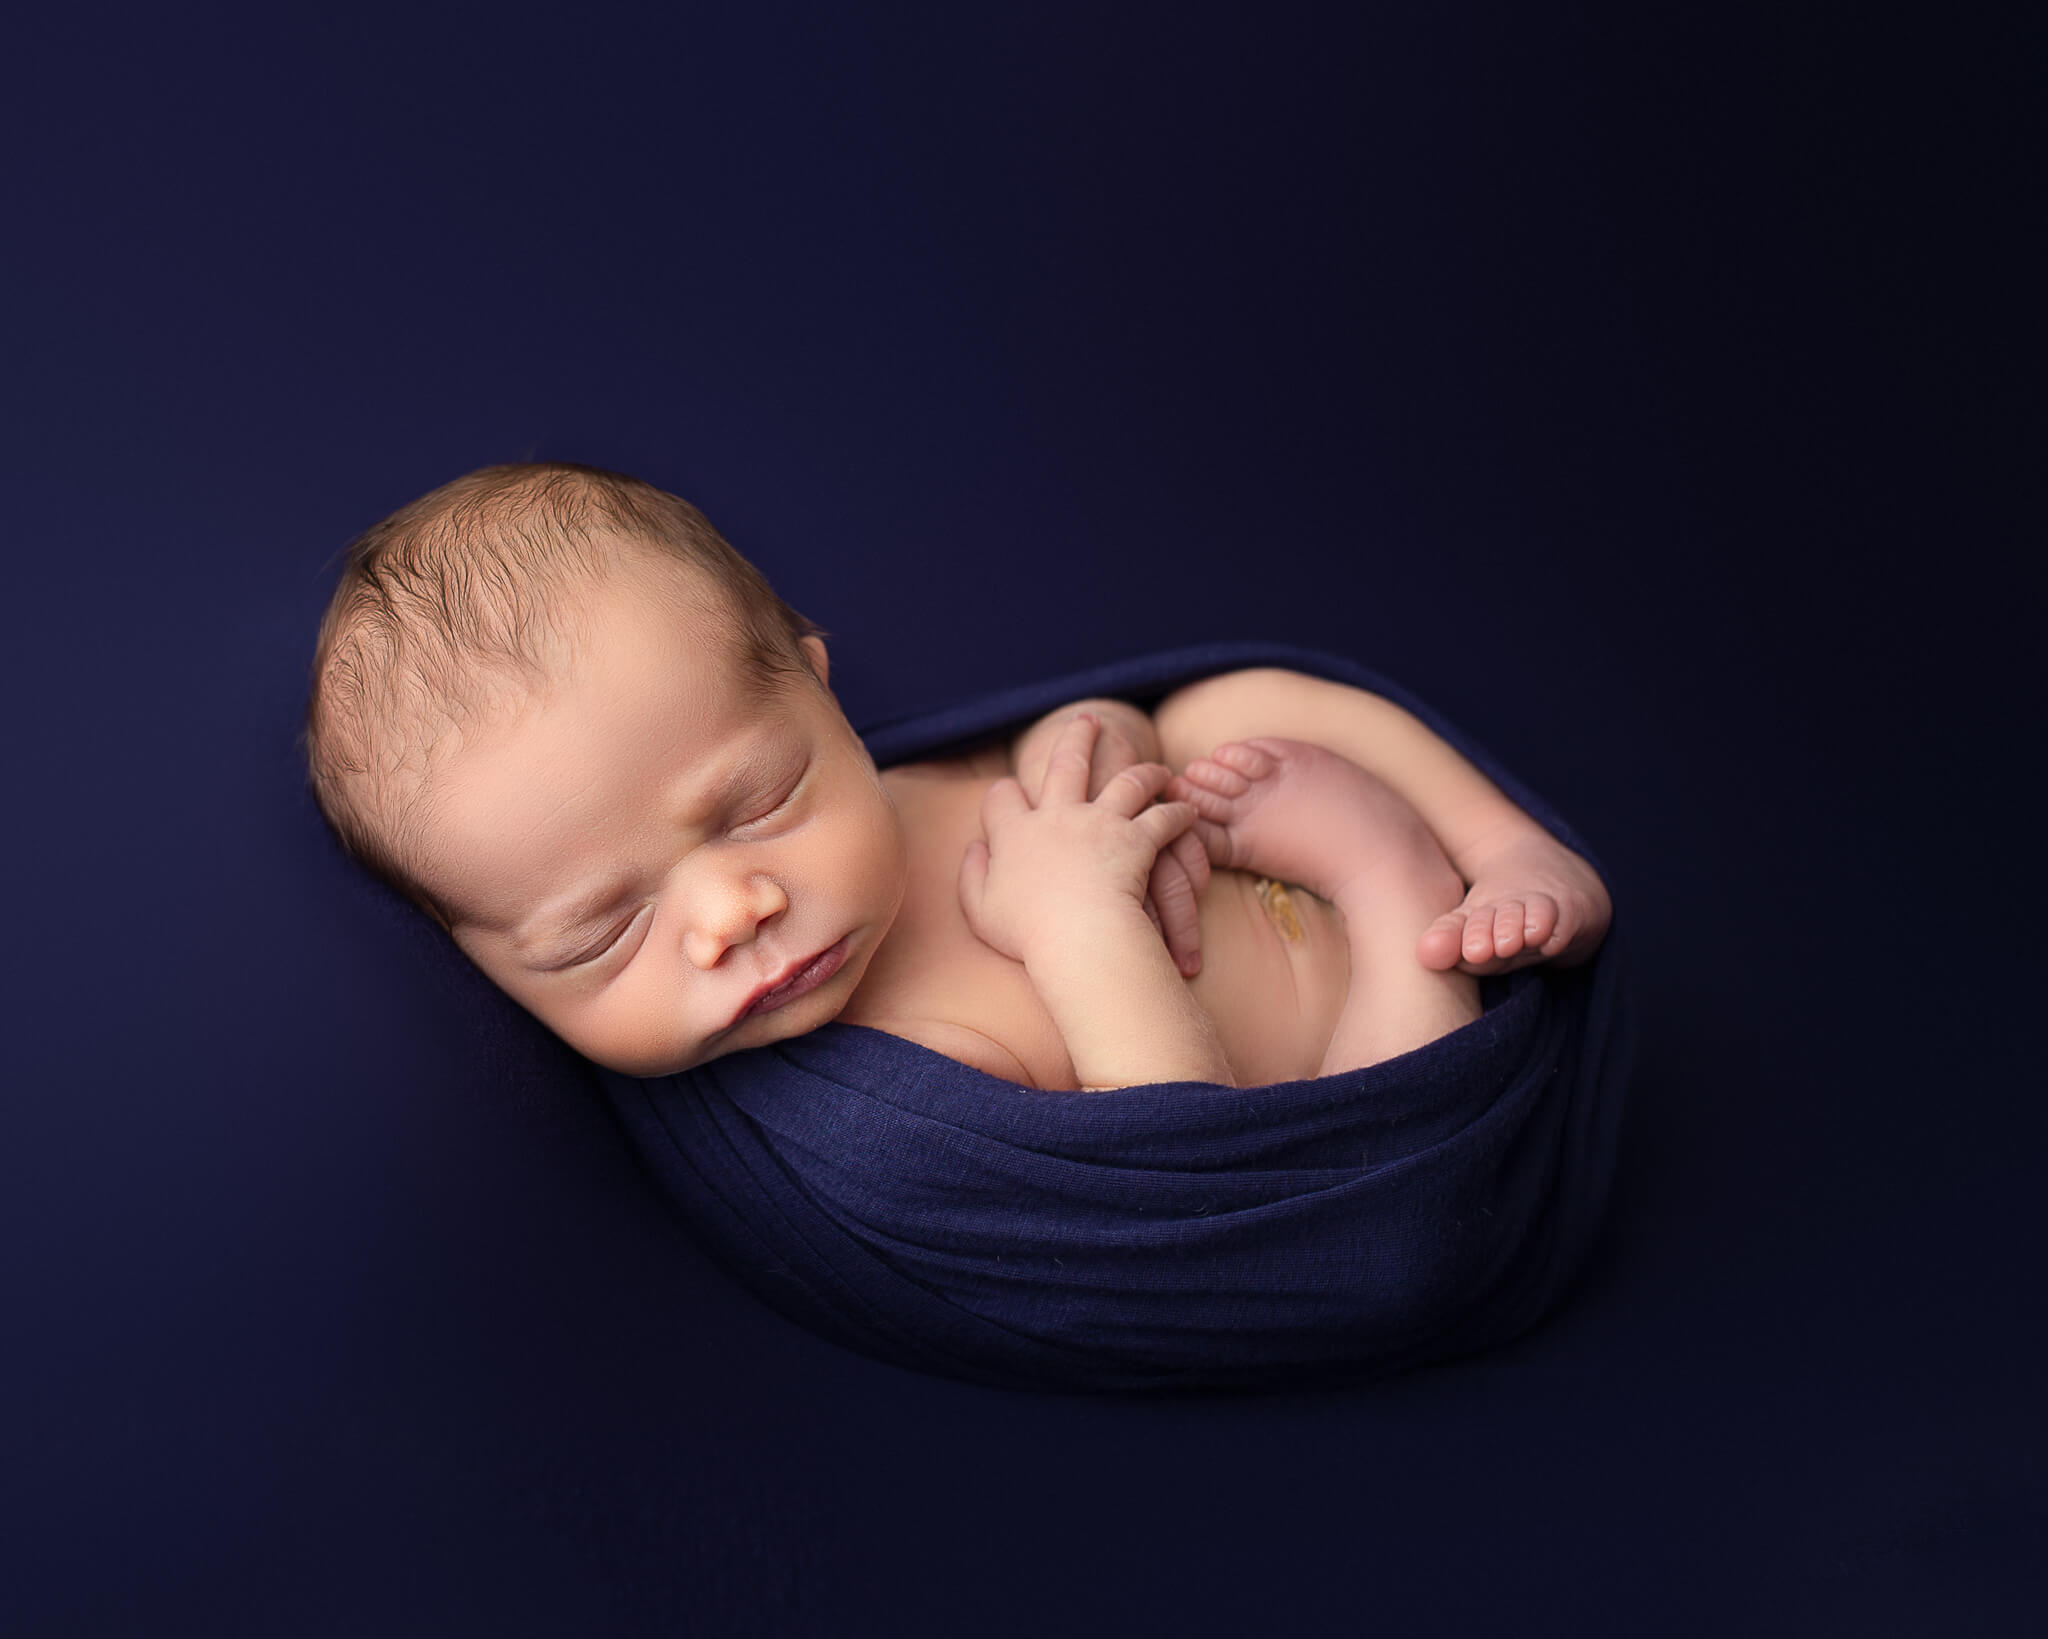 day care centers in akron OH in blog photo of newborn in navy blue blanket